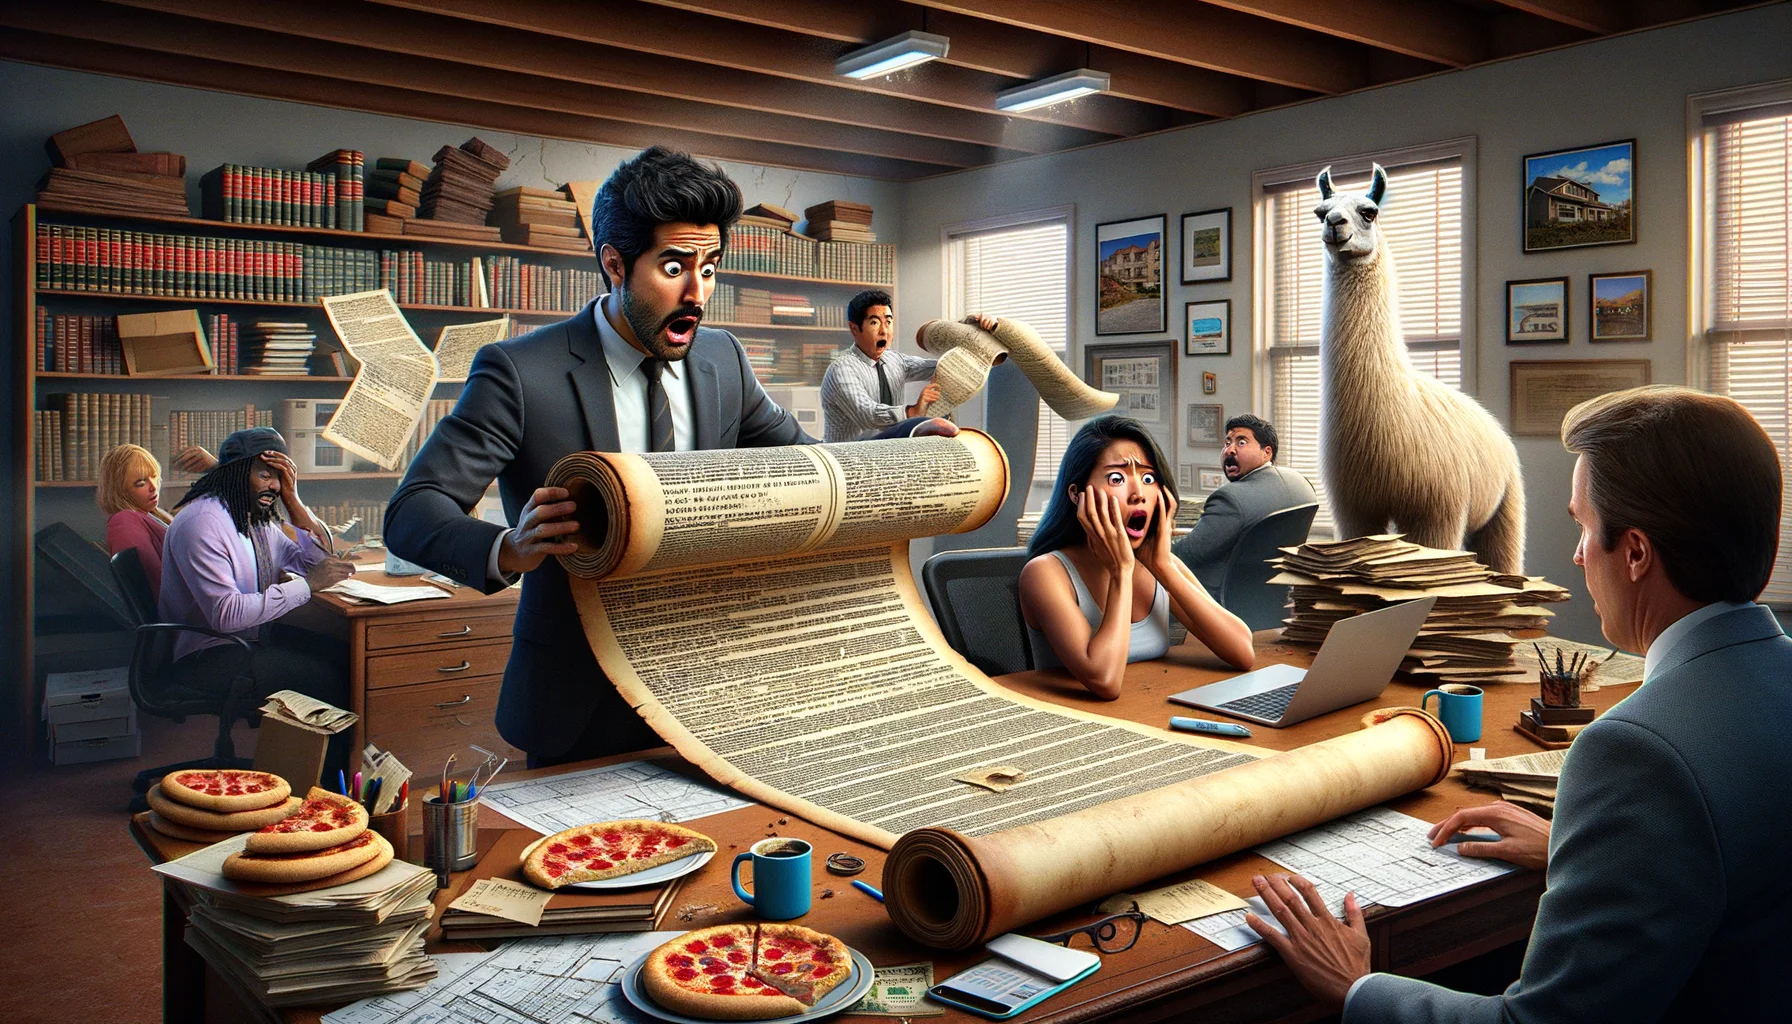 An image depicting a humorous, realistic scenario during a property research. The scene is set in a bustling real estate office. A male Hispanic real estate agent has an incredulous look on his face as he unravels a massive, ancient-looking 'scroll of property deeds'. Beside him, a Black female intern maintains a look of surprise, clutching her coffee so tightly that it spills onto her desk. In the background, a South Asian male colleague is trying his best not to burst into laughter while reviewing home listings that have pictures of llamas photobombing each image. The room is filled with half-eaten pizza boxes, crumbled blueprints, and overfilled bookshelves with property law books.